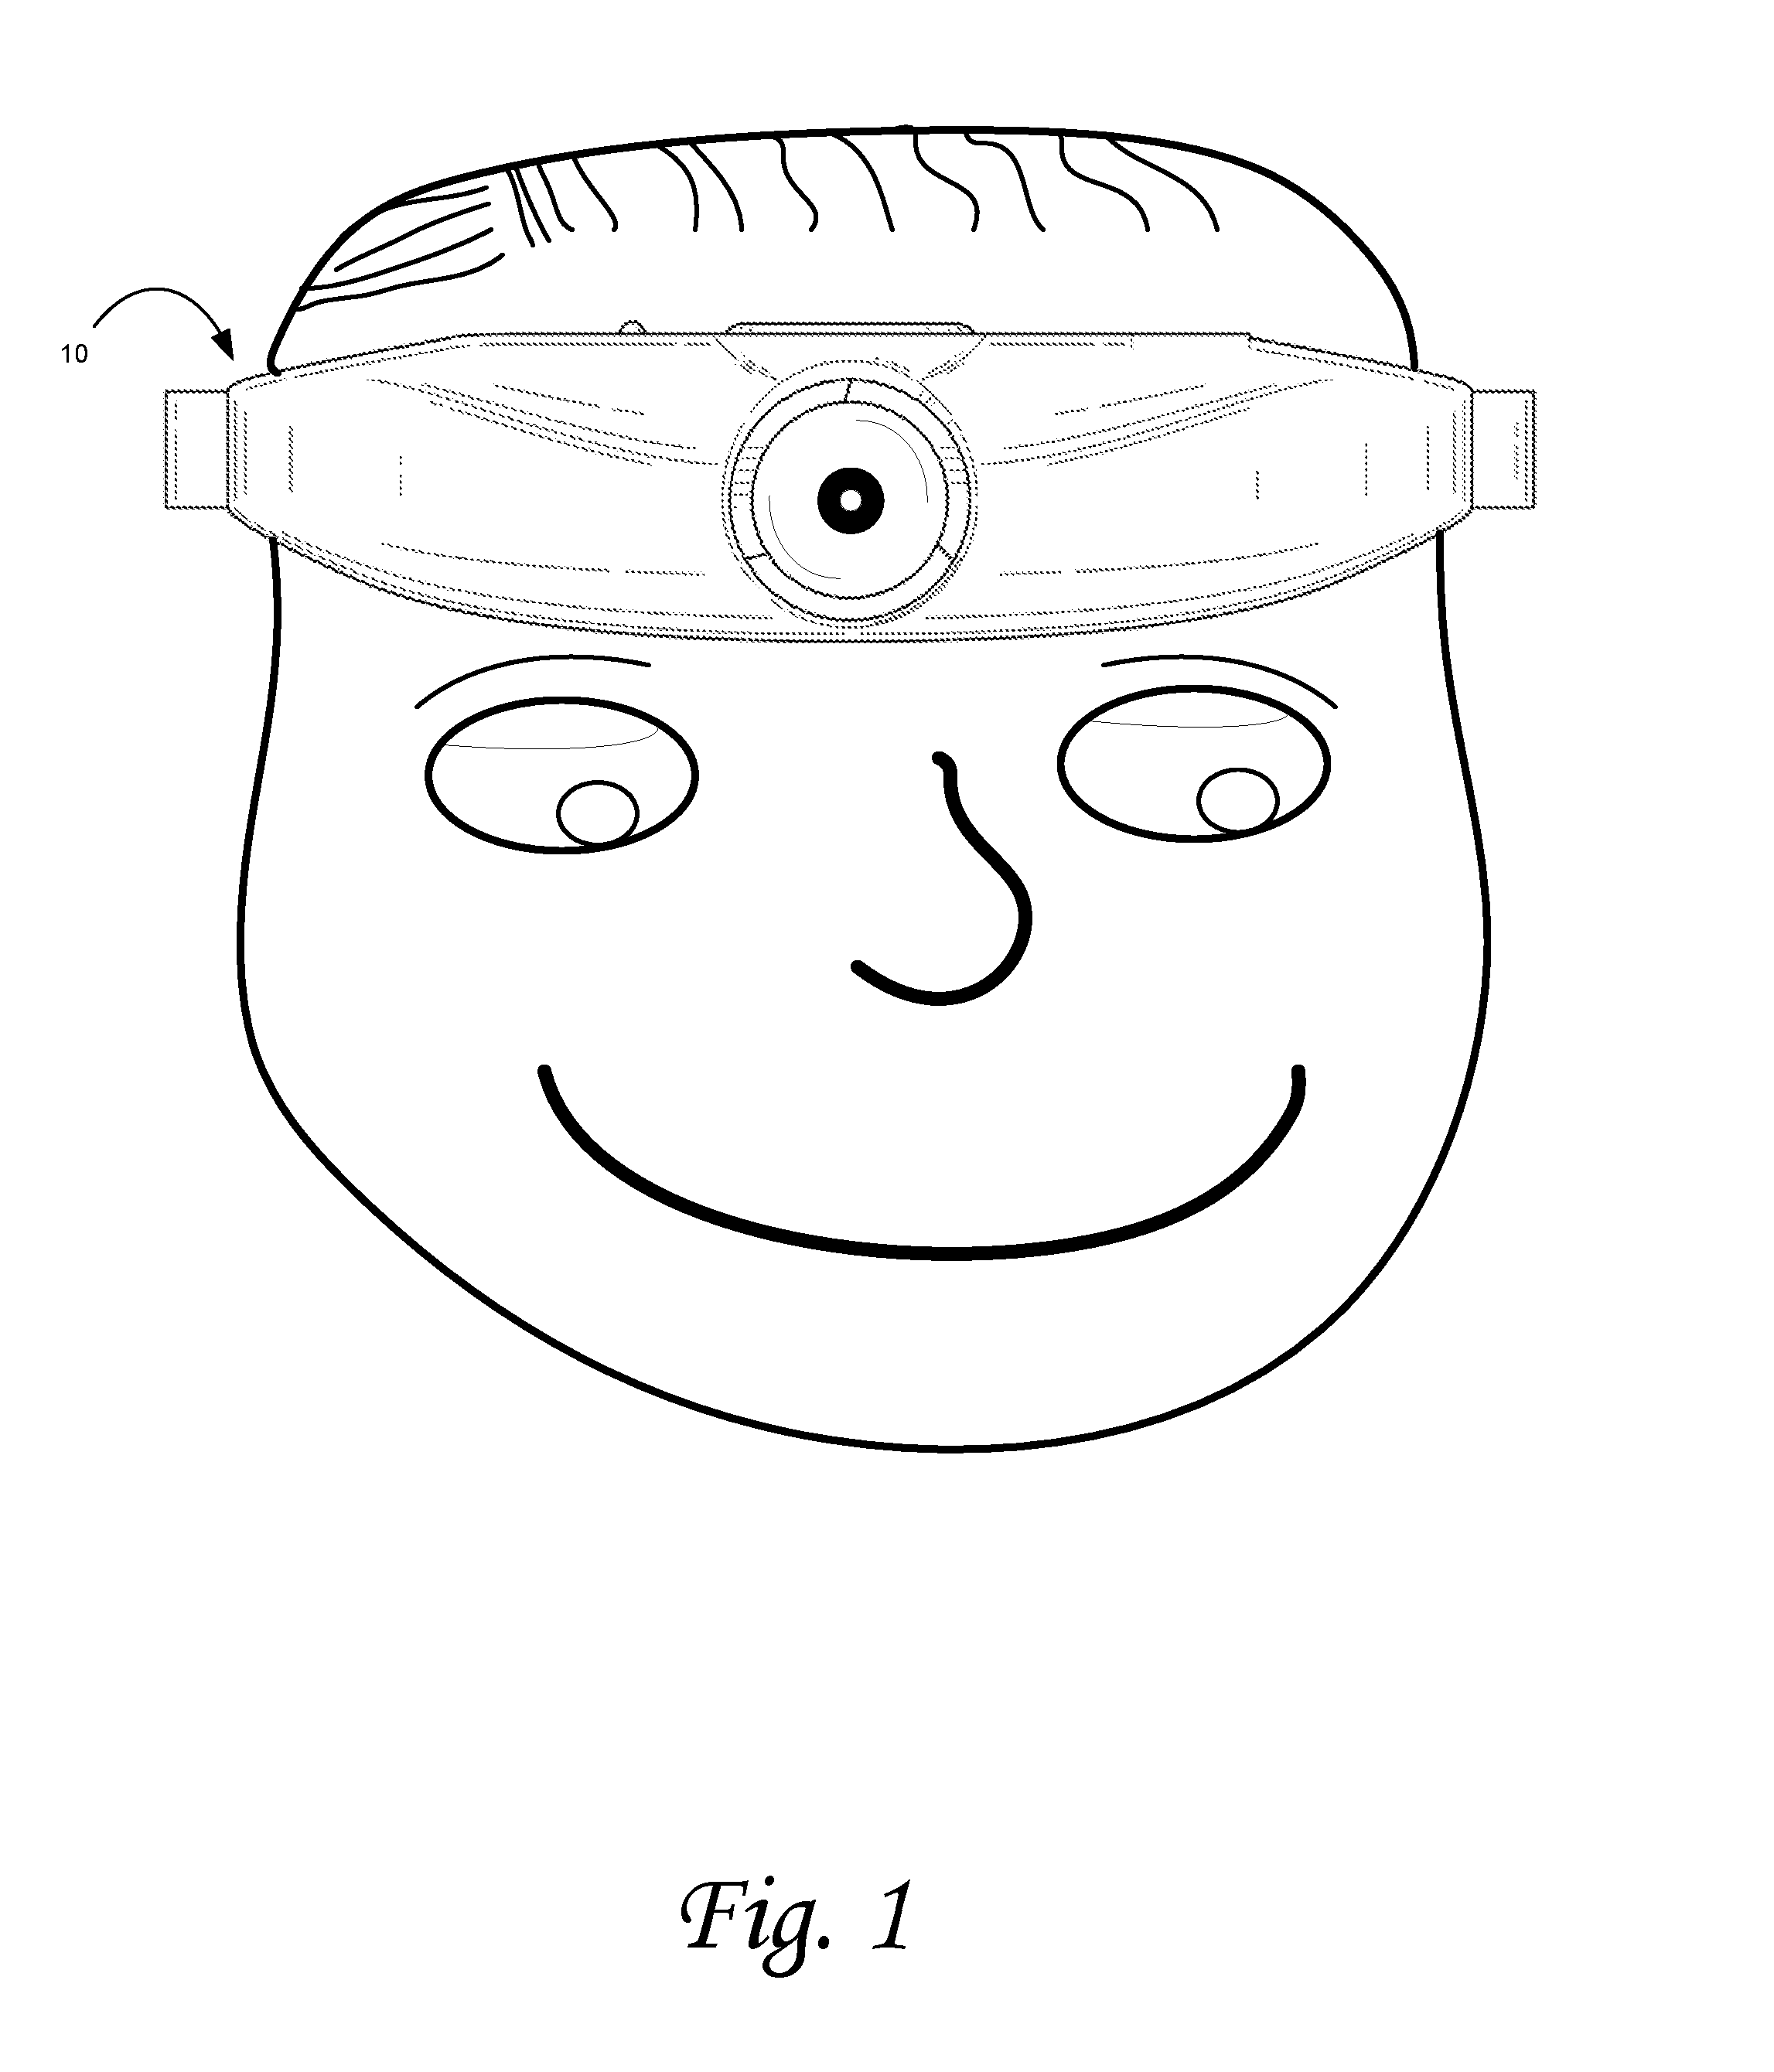 Camera Headband Device And System With Attachable Apparatus